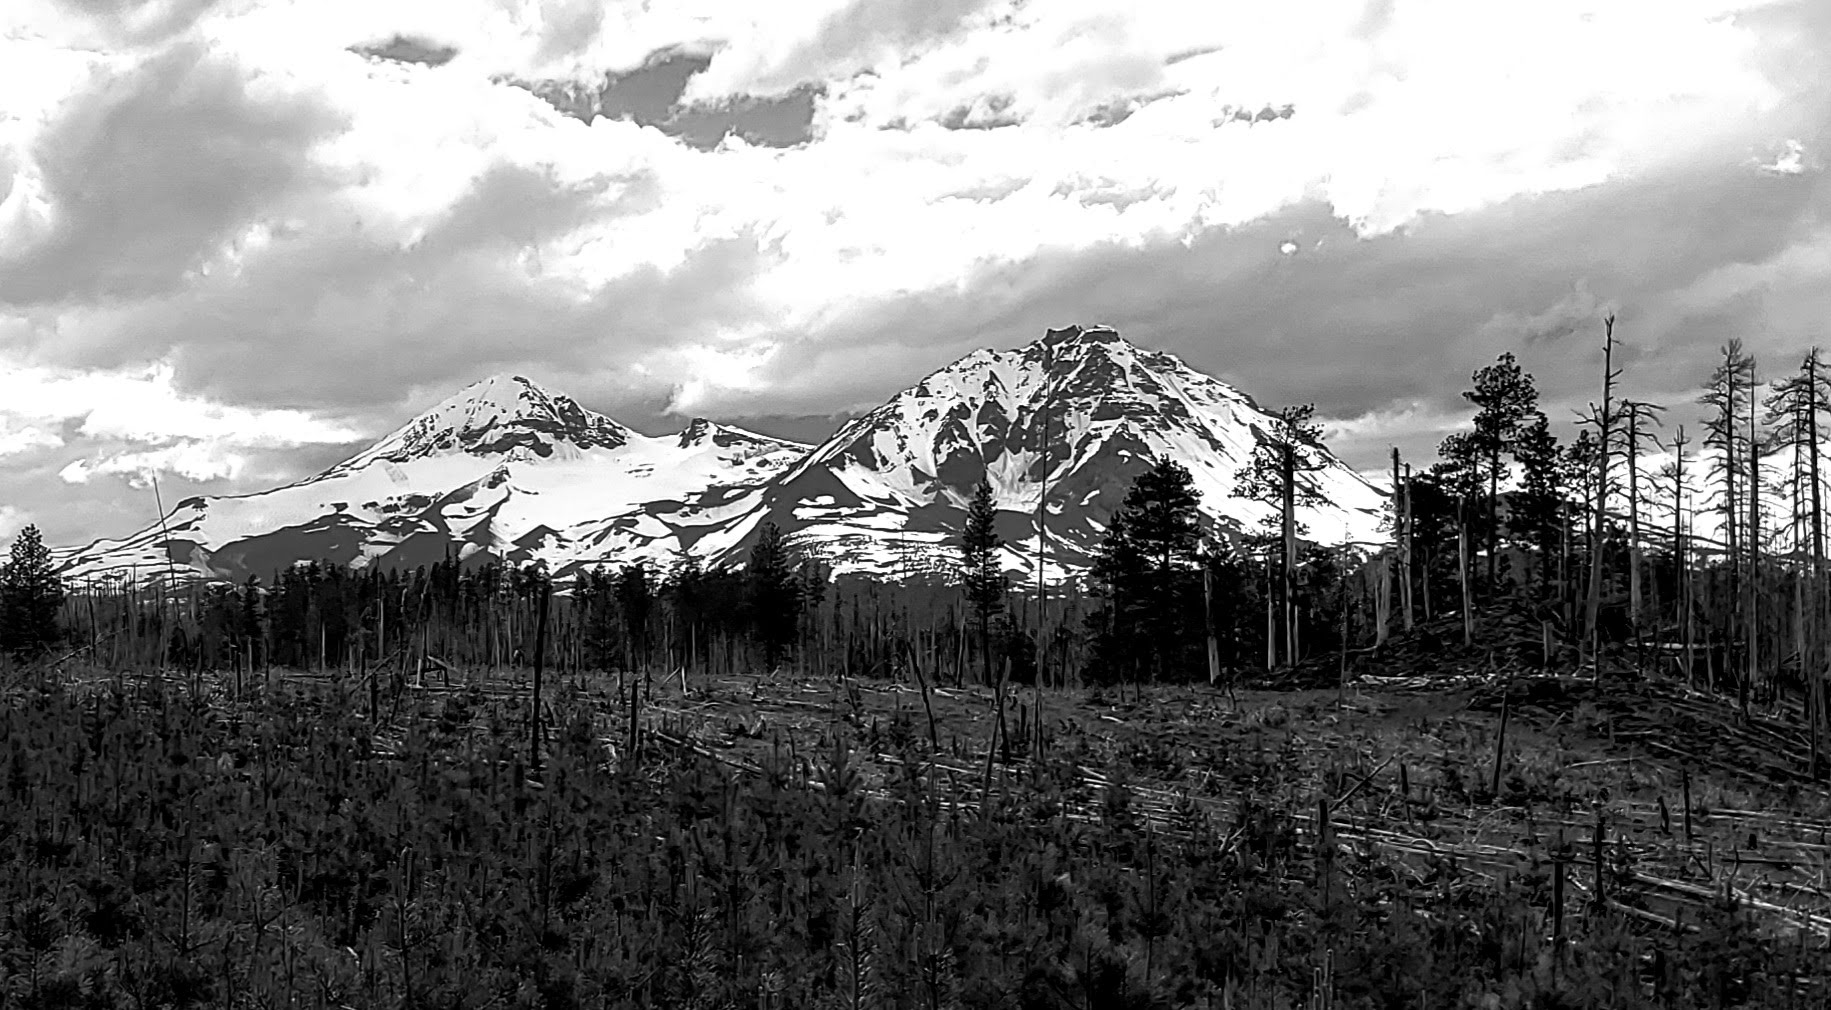 Picture of three sisters mountains near bend for Bend, Oregon Digital Marketing Consultant page.